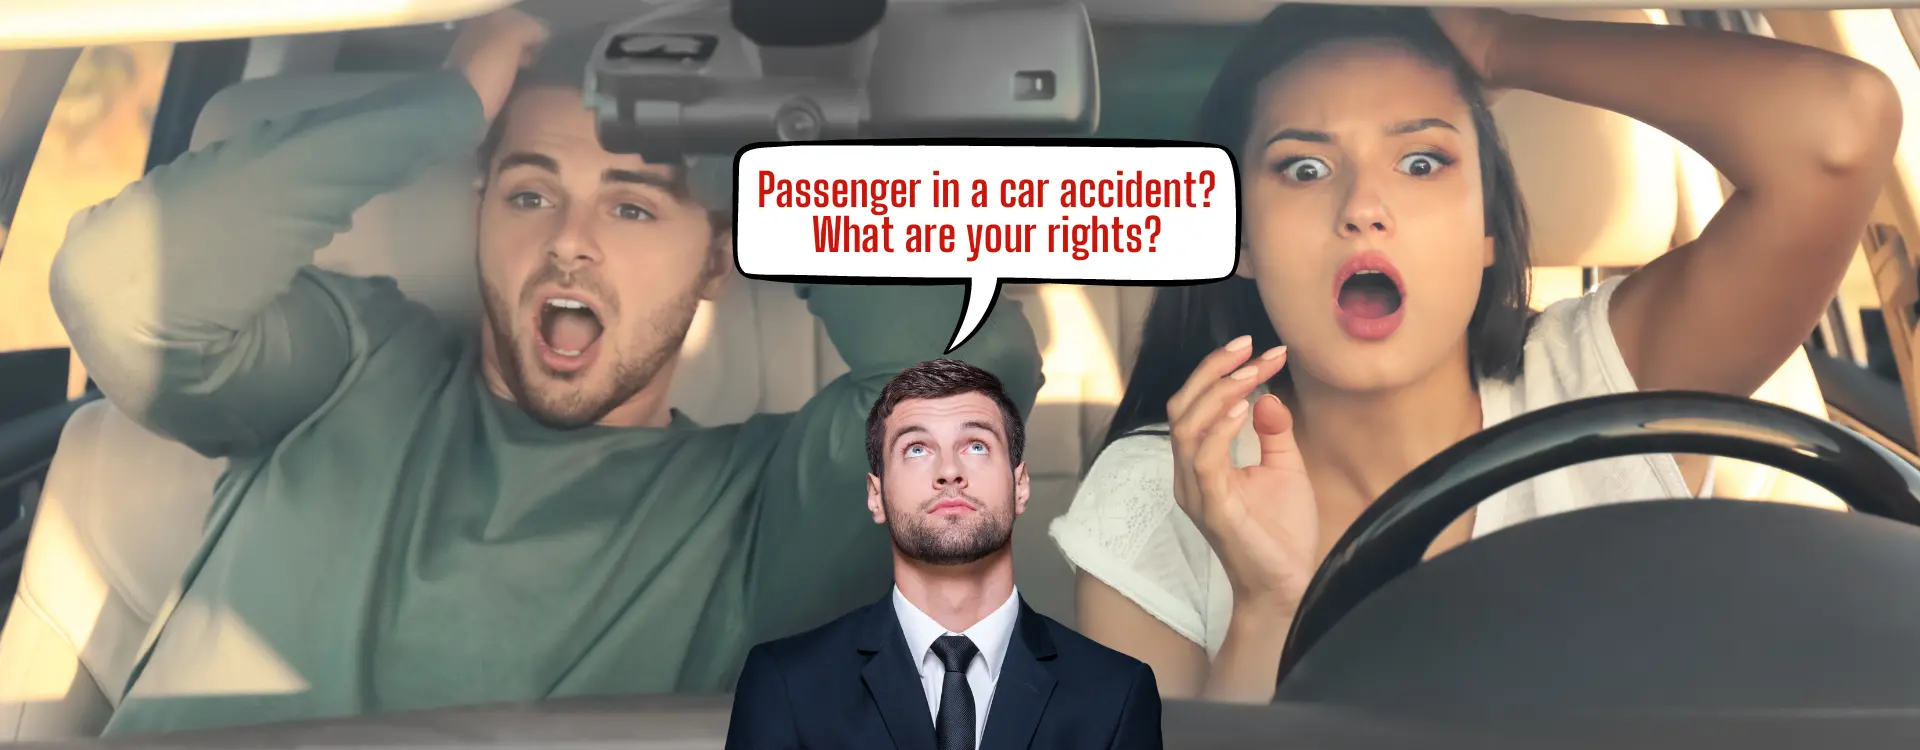 passenger in a car accident